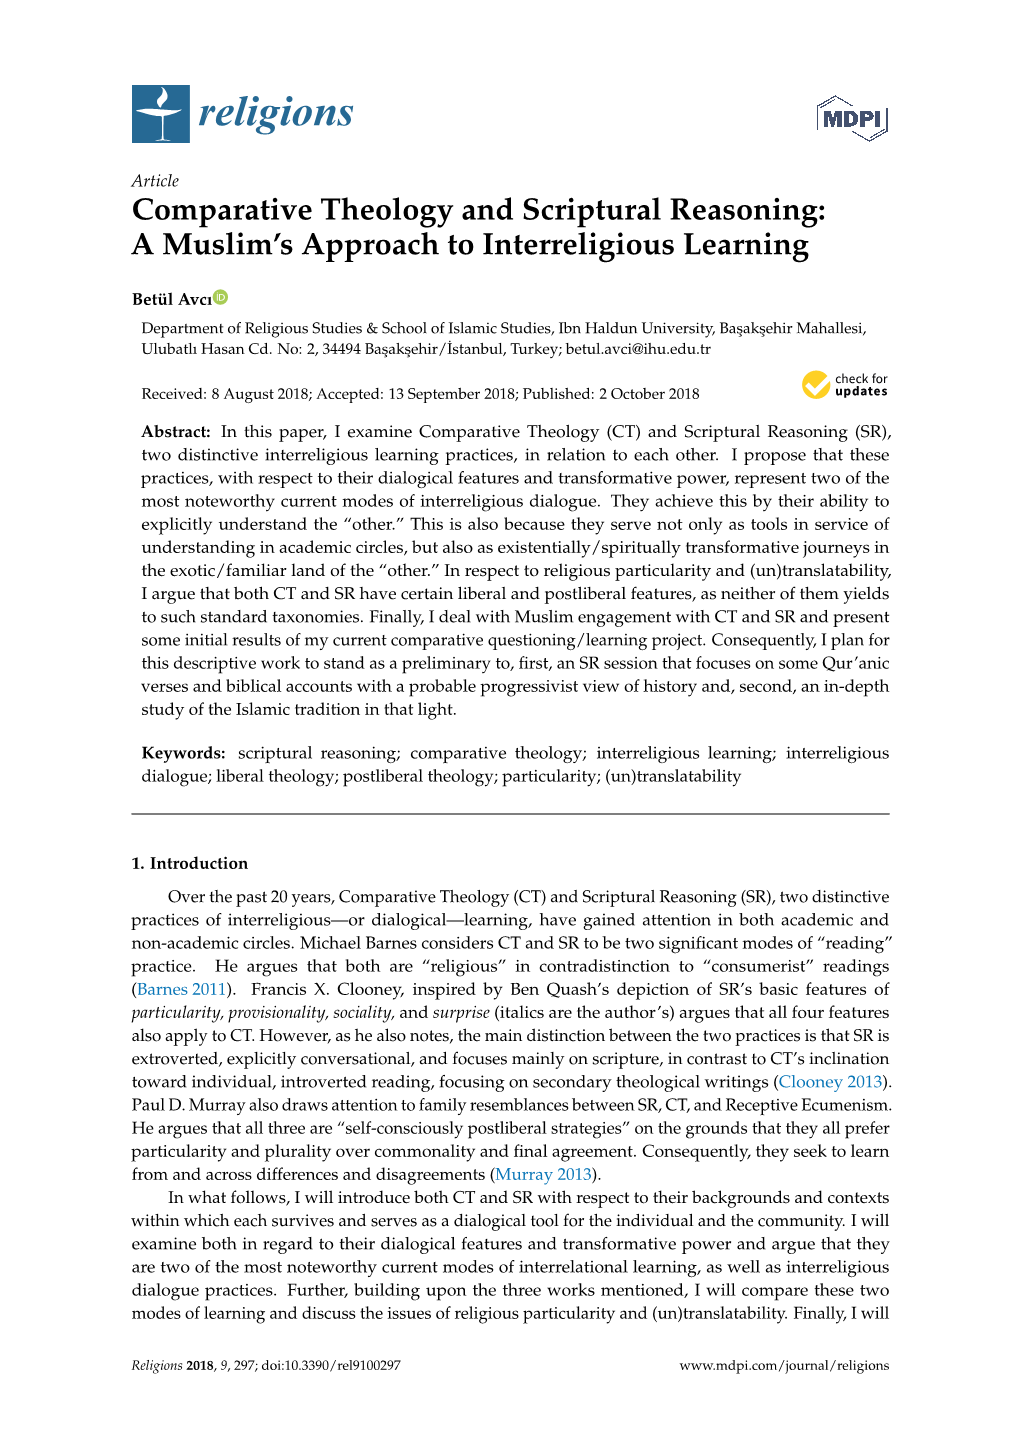 Comparative Theology and Scriptural Reasoning: a Muslim’S Approach to Interreligious Learning